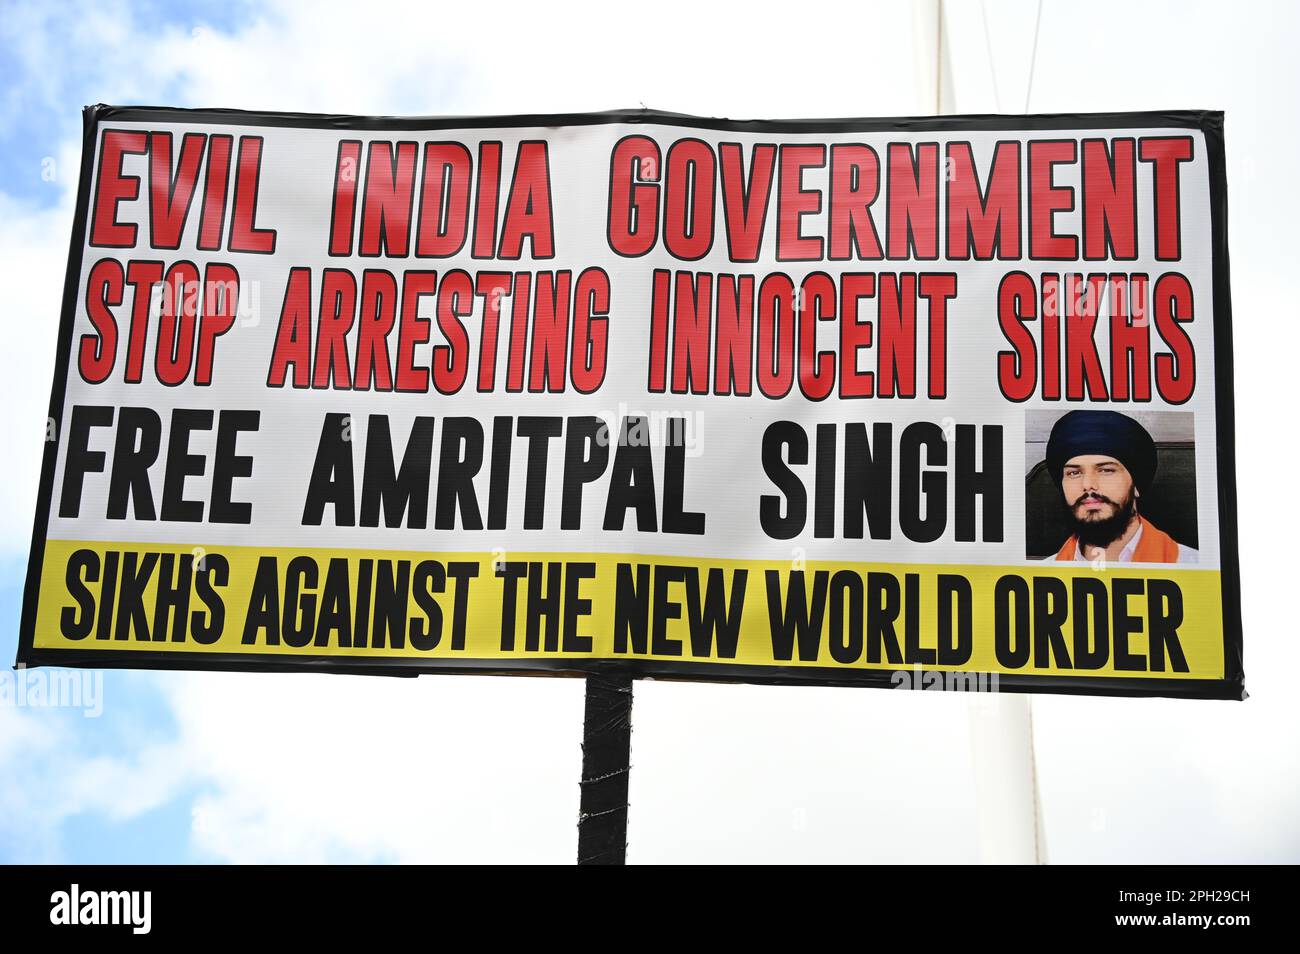 Protest the Evil India government stop arresting innocent Sikhs, London, UK Credit: See Li/Picture Capital/Alamy Live News Stock Photo